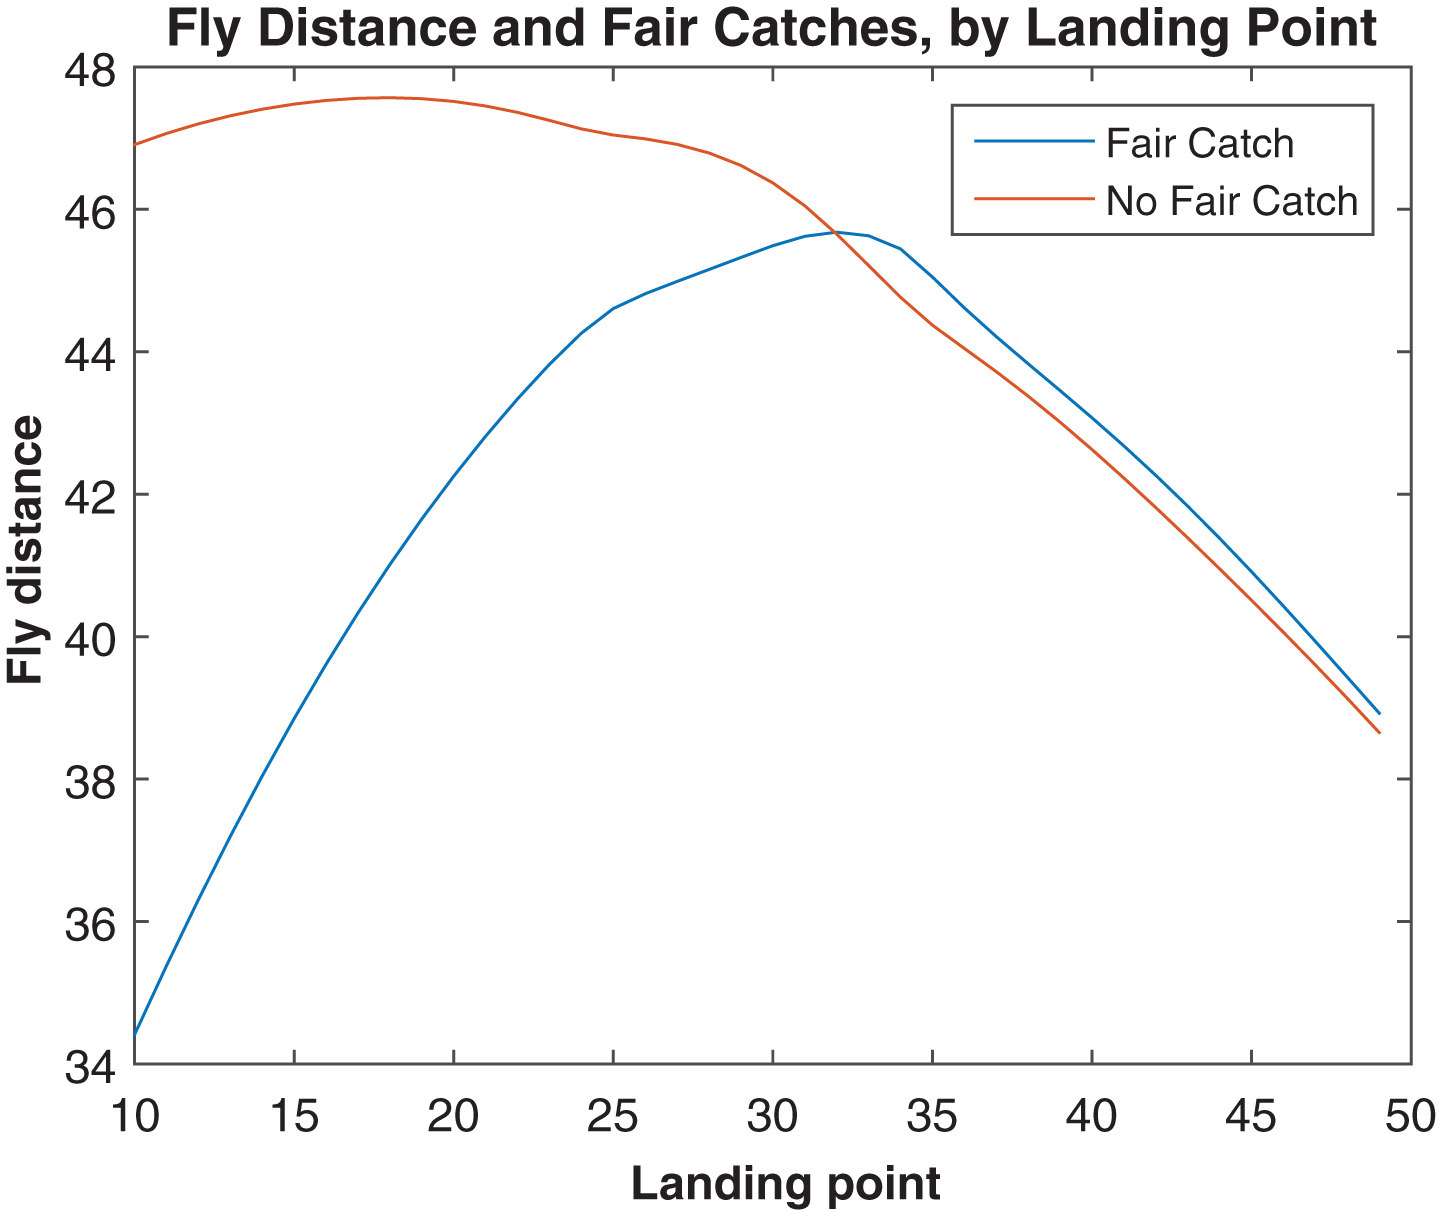 Average fly distance for punts resulting in a fair catch or not, by landing point, 2013.